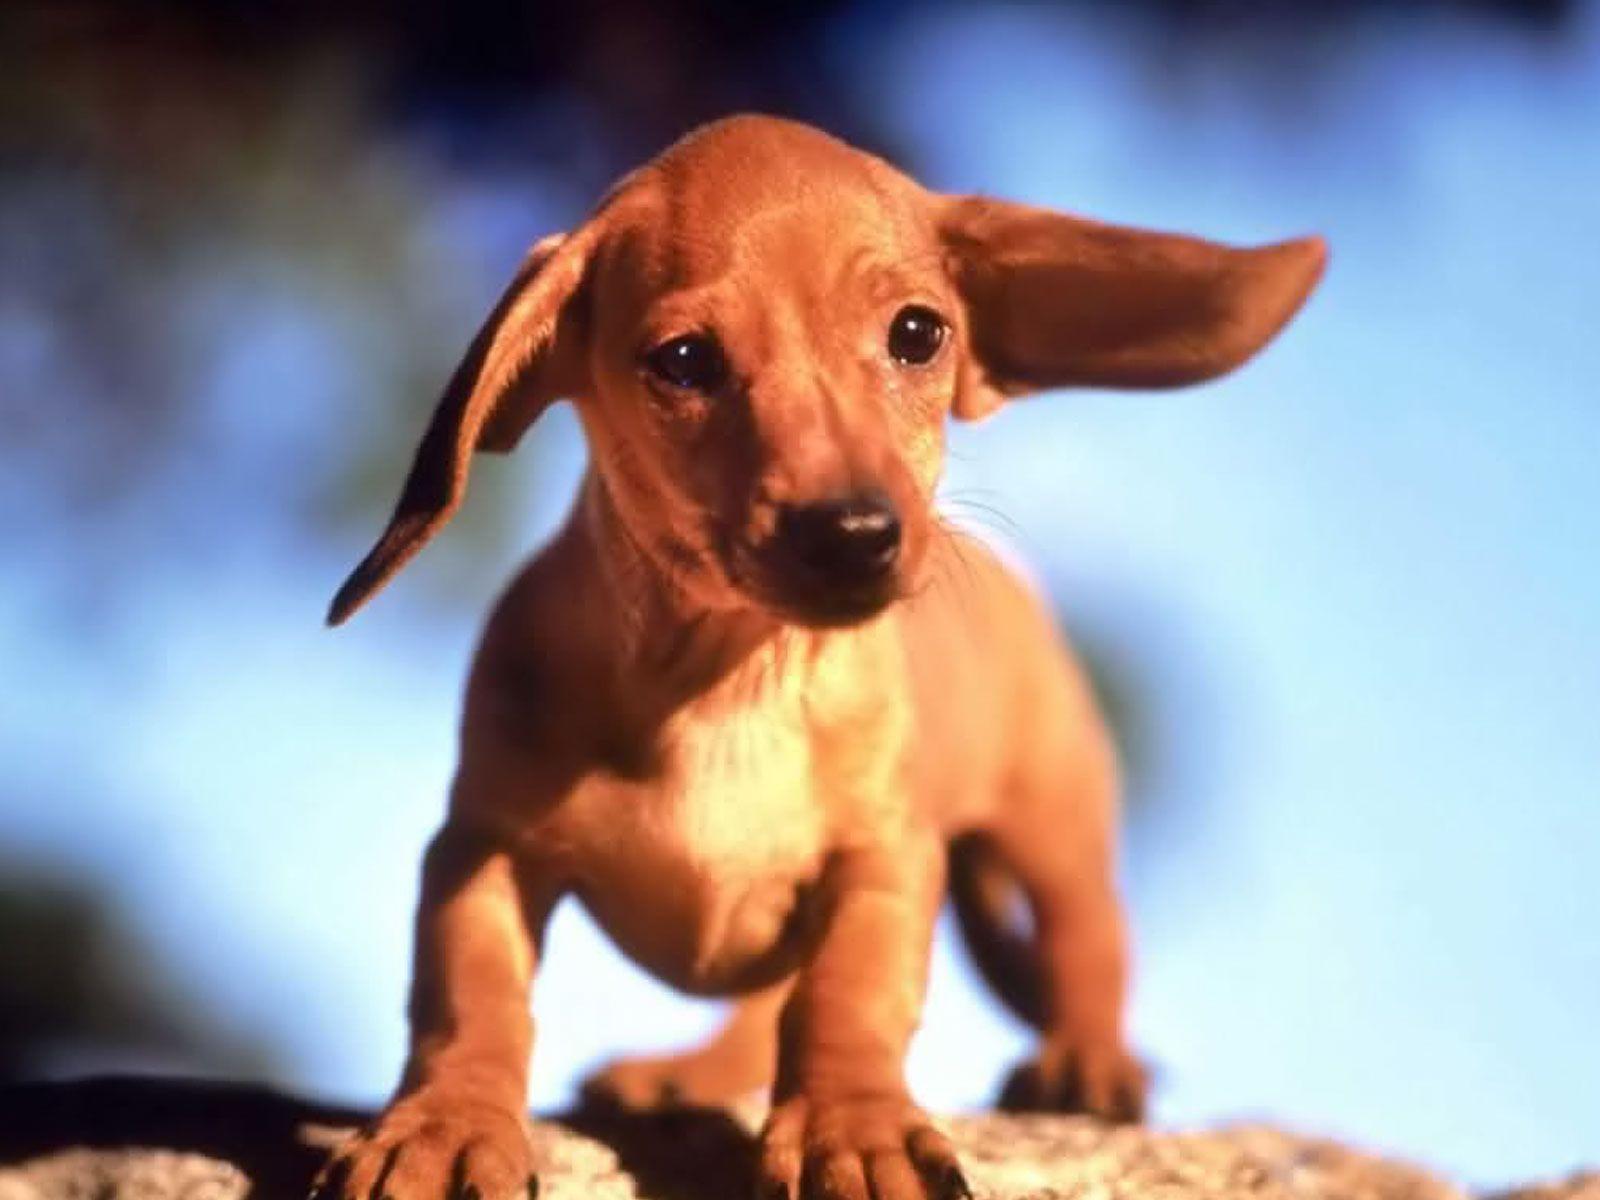 it's all about the ears #doxie #dachshund #cute #puppy via